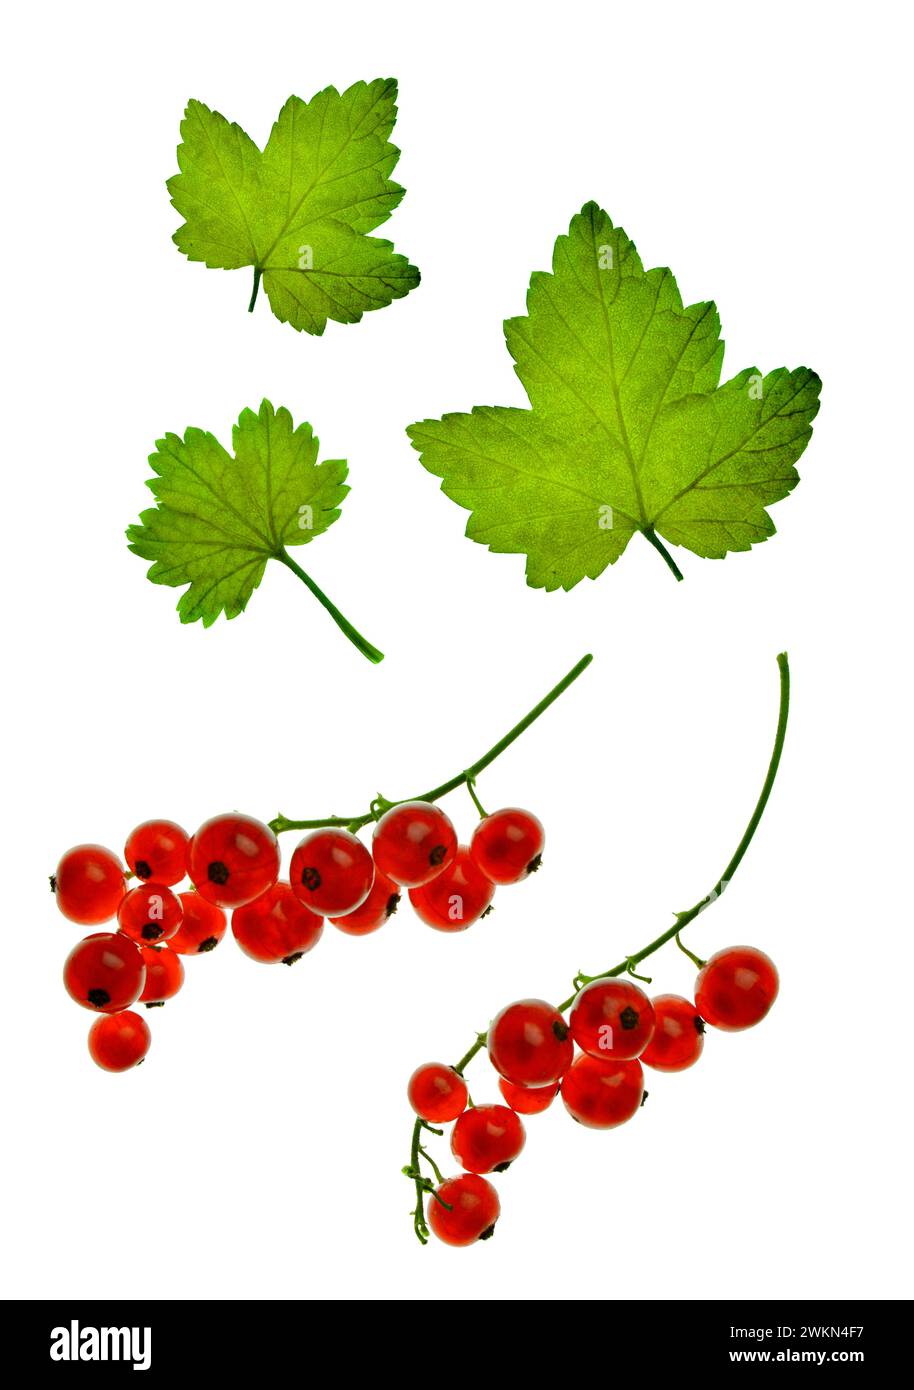 red currant bush, ripening red currant berries, red currant leaves, Juicy currant.  Fresh red currant isolated on white background. Currant leaves. Stock Photo